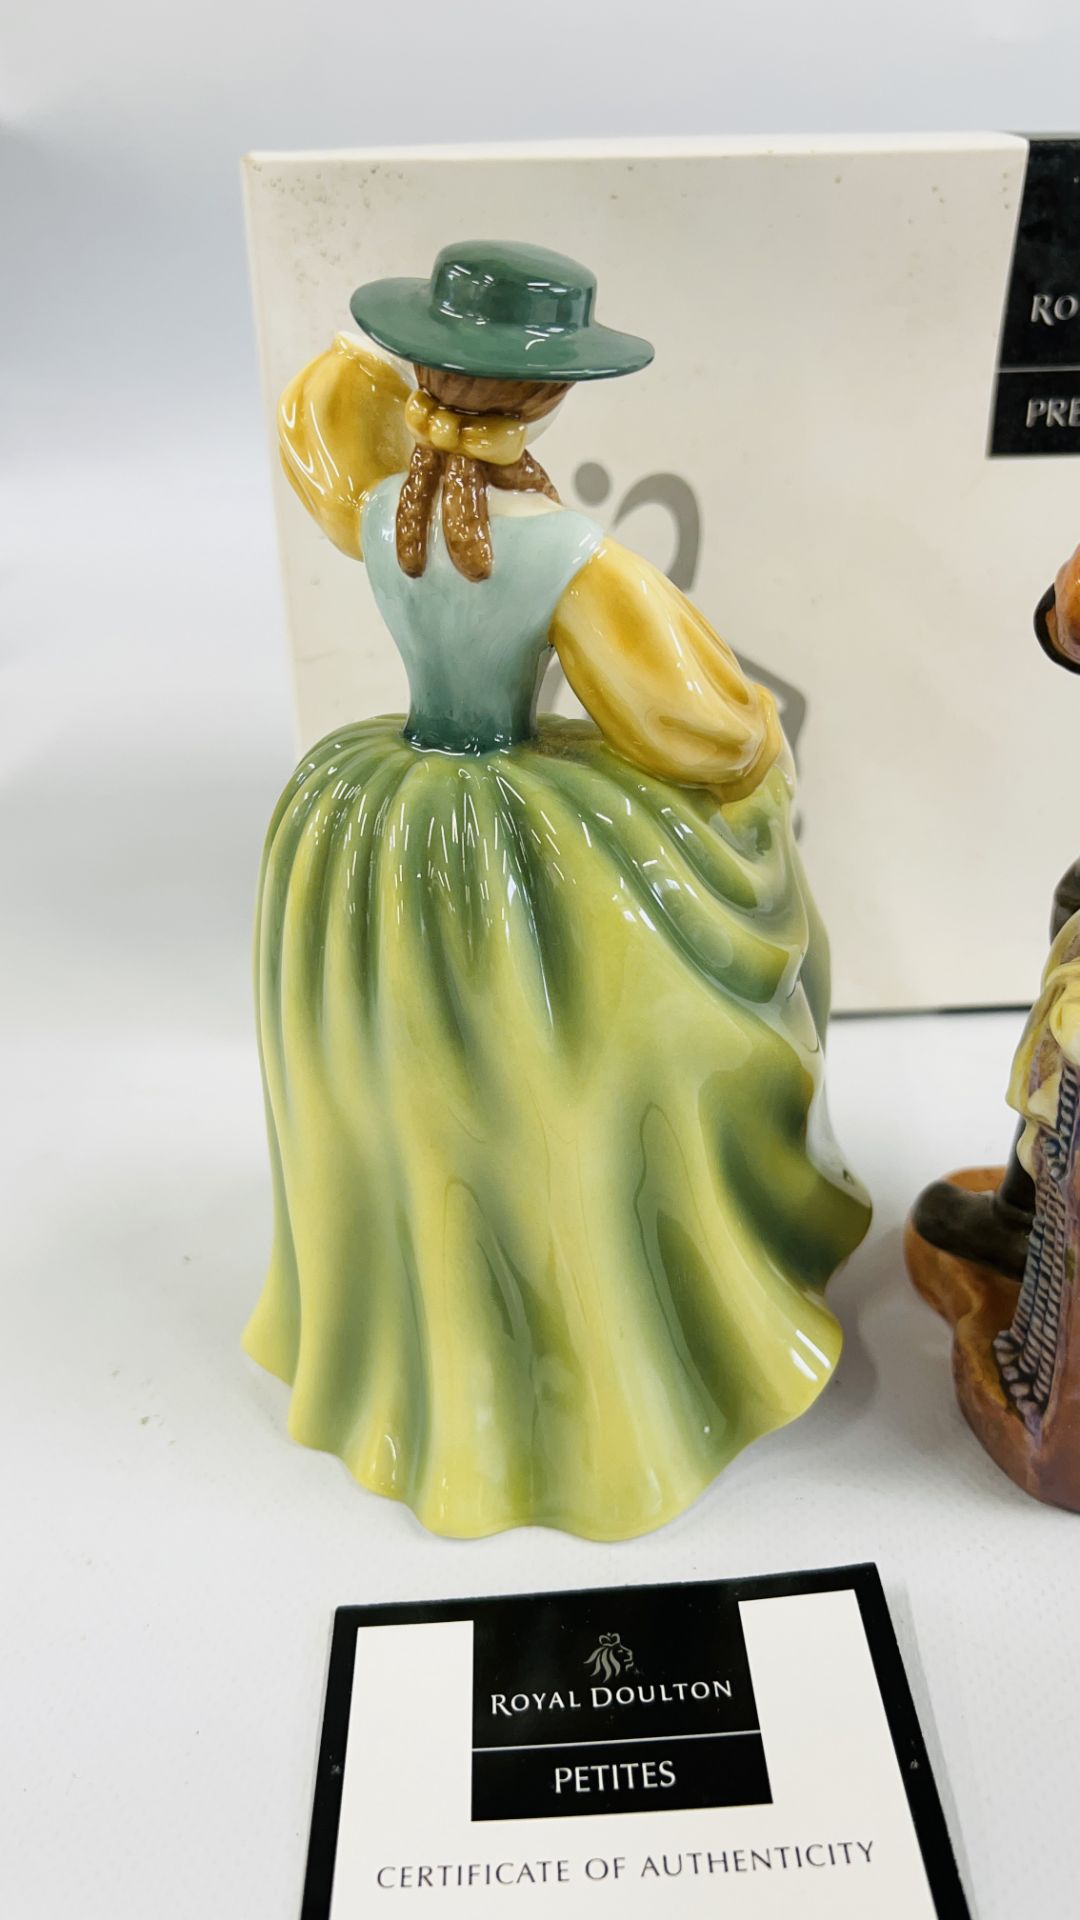 A ROYAL DOULTON FIGURINE "BUTTERCUP" HN 4805 IN ORGINAL BOX WITH CERTIFICATE, - Image 7 of 10